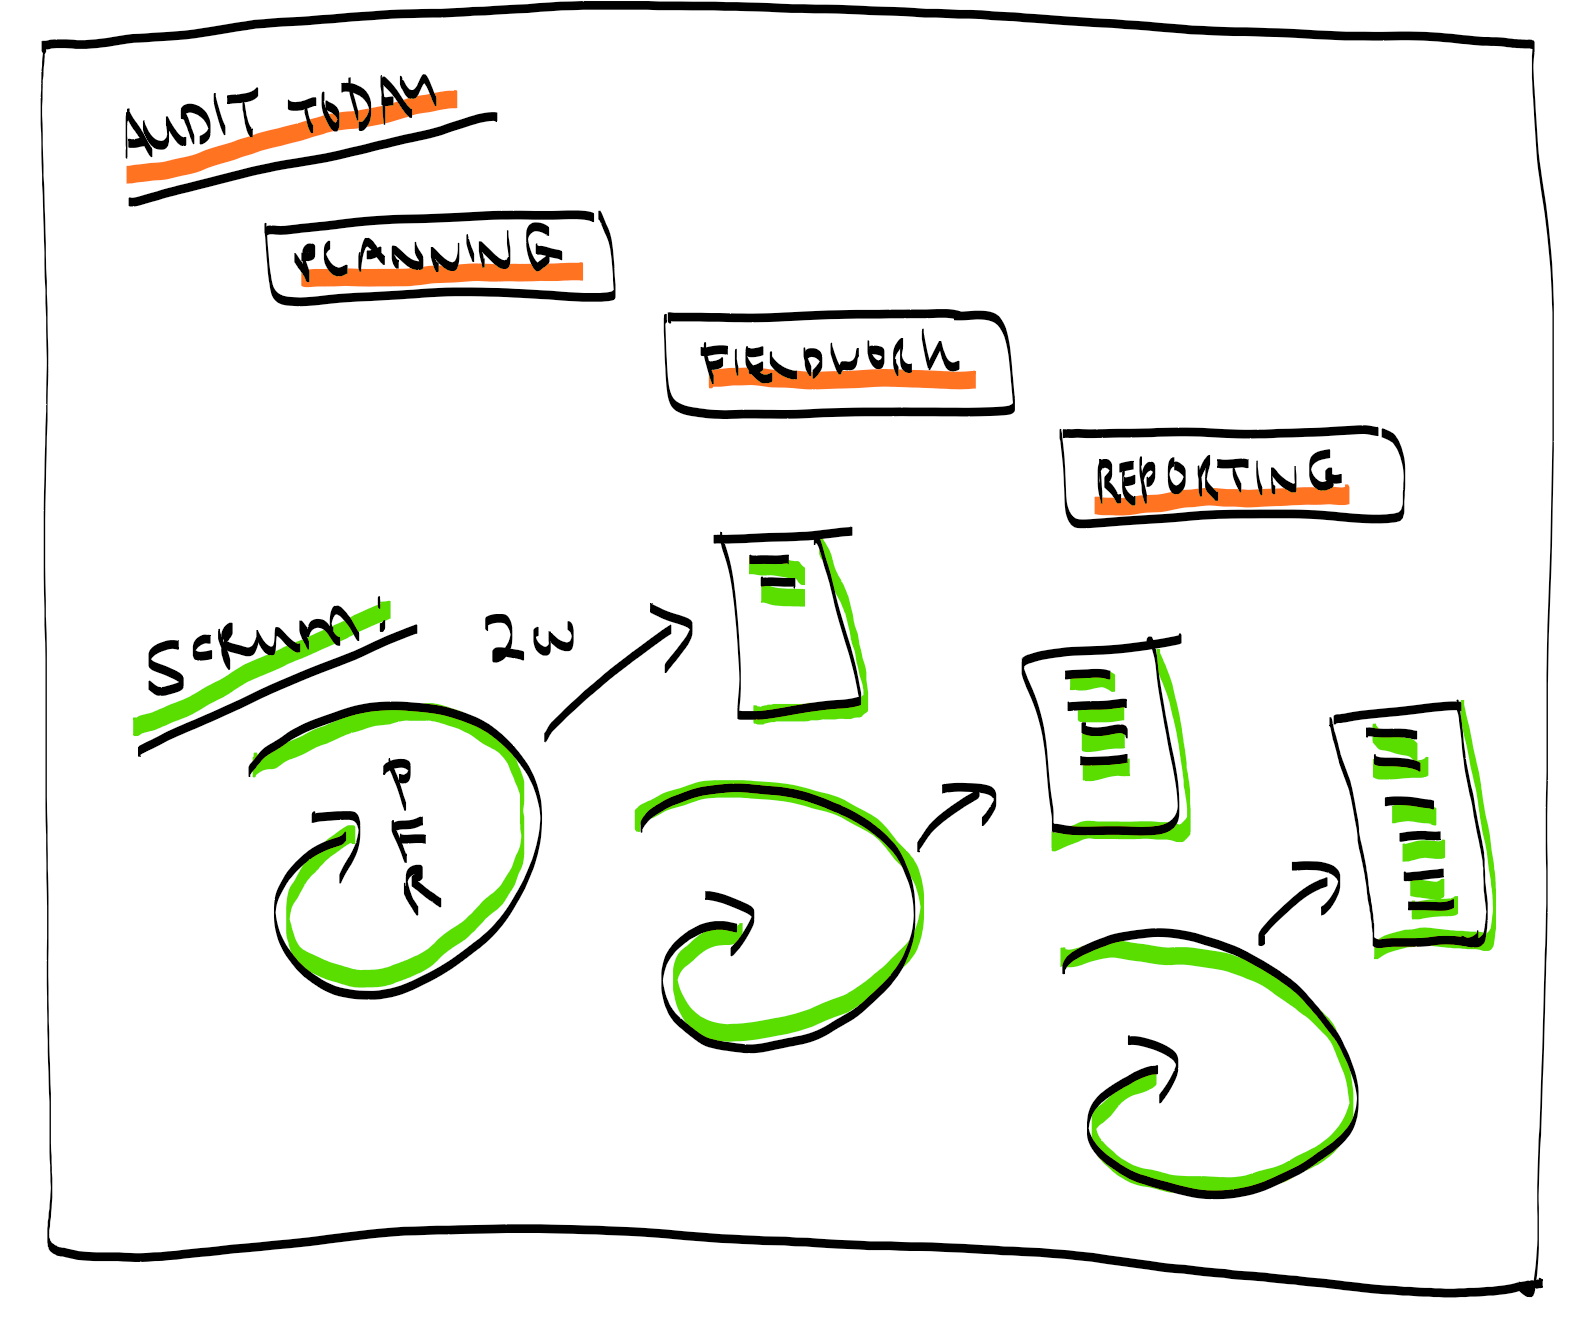 Scrum in Audit (for the team)